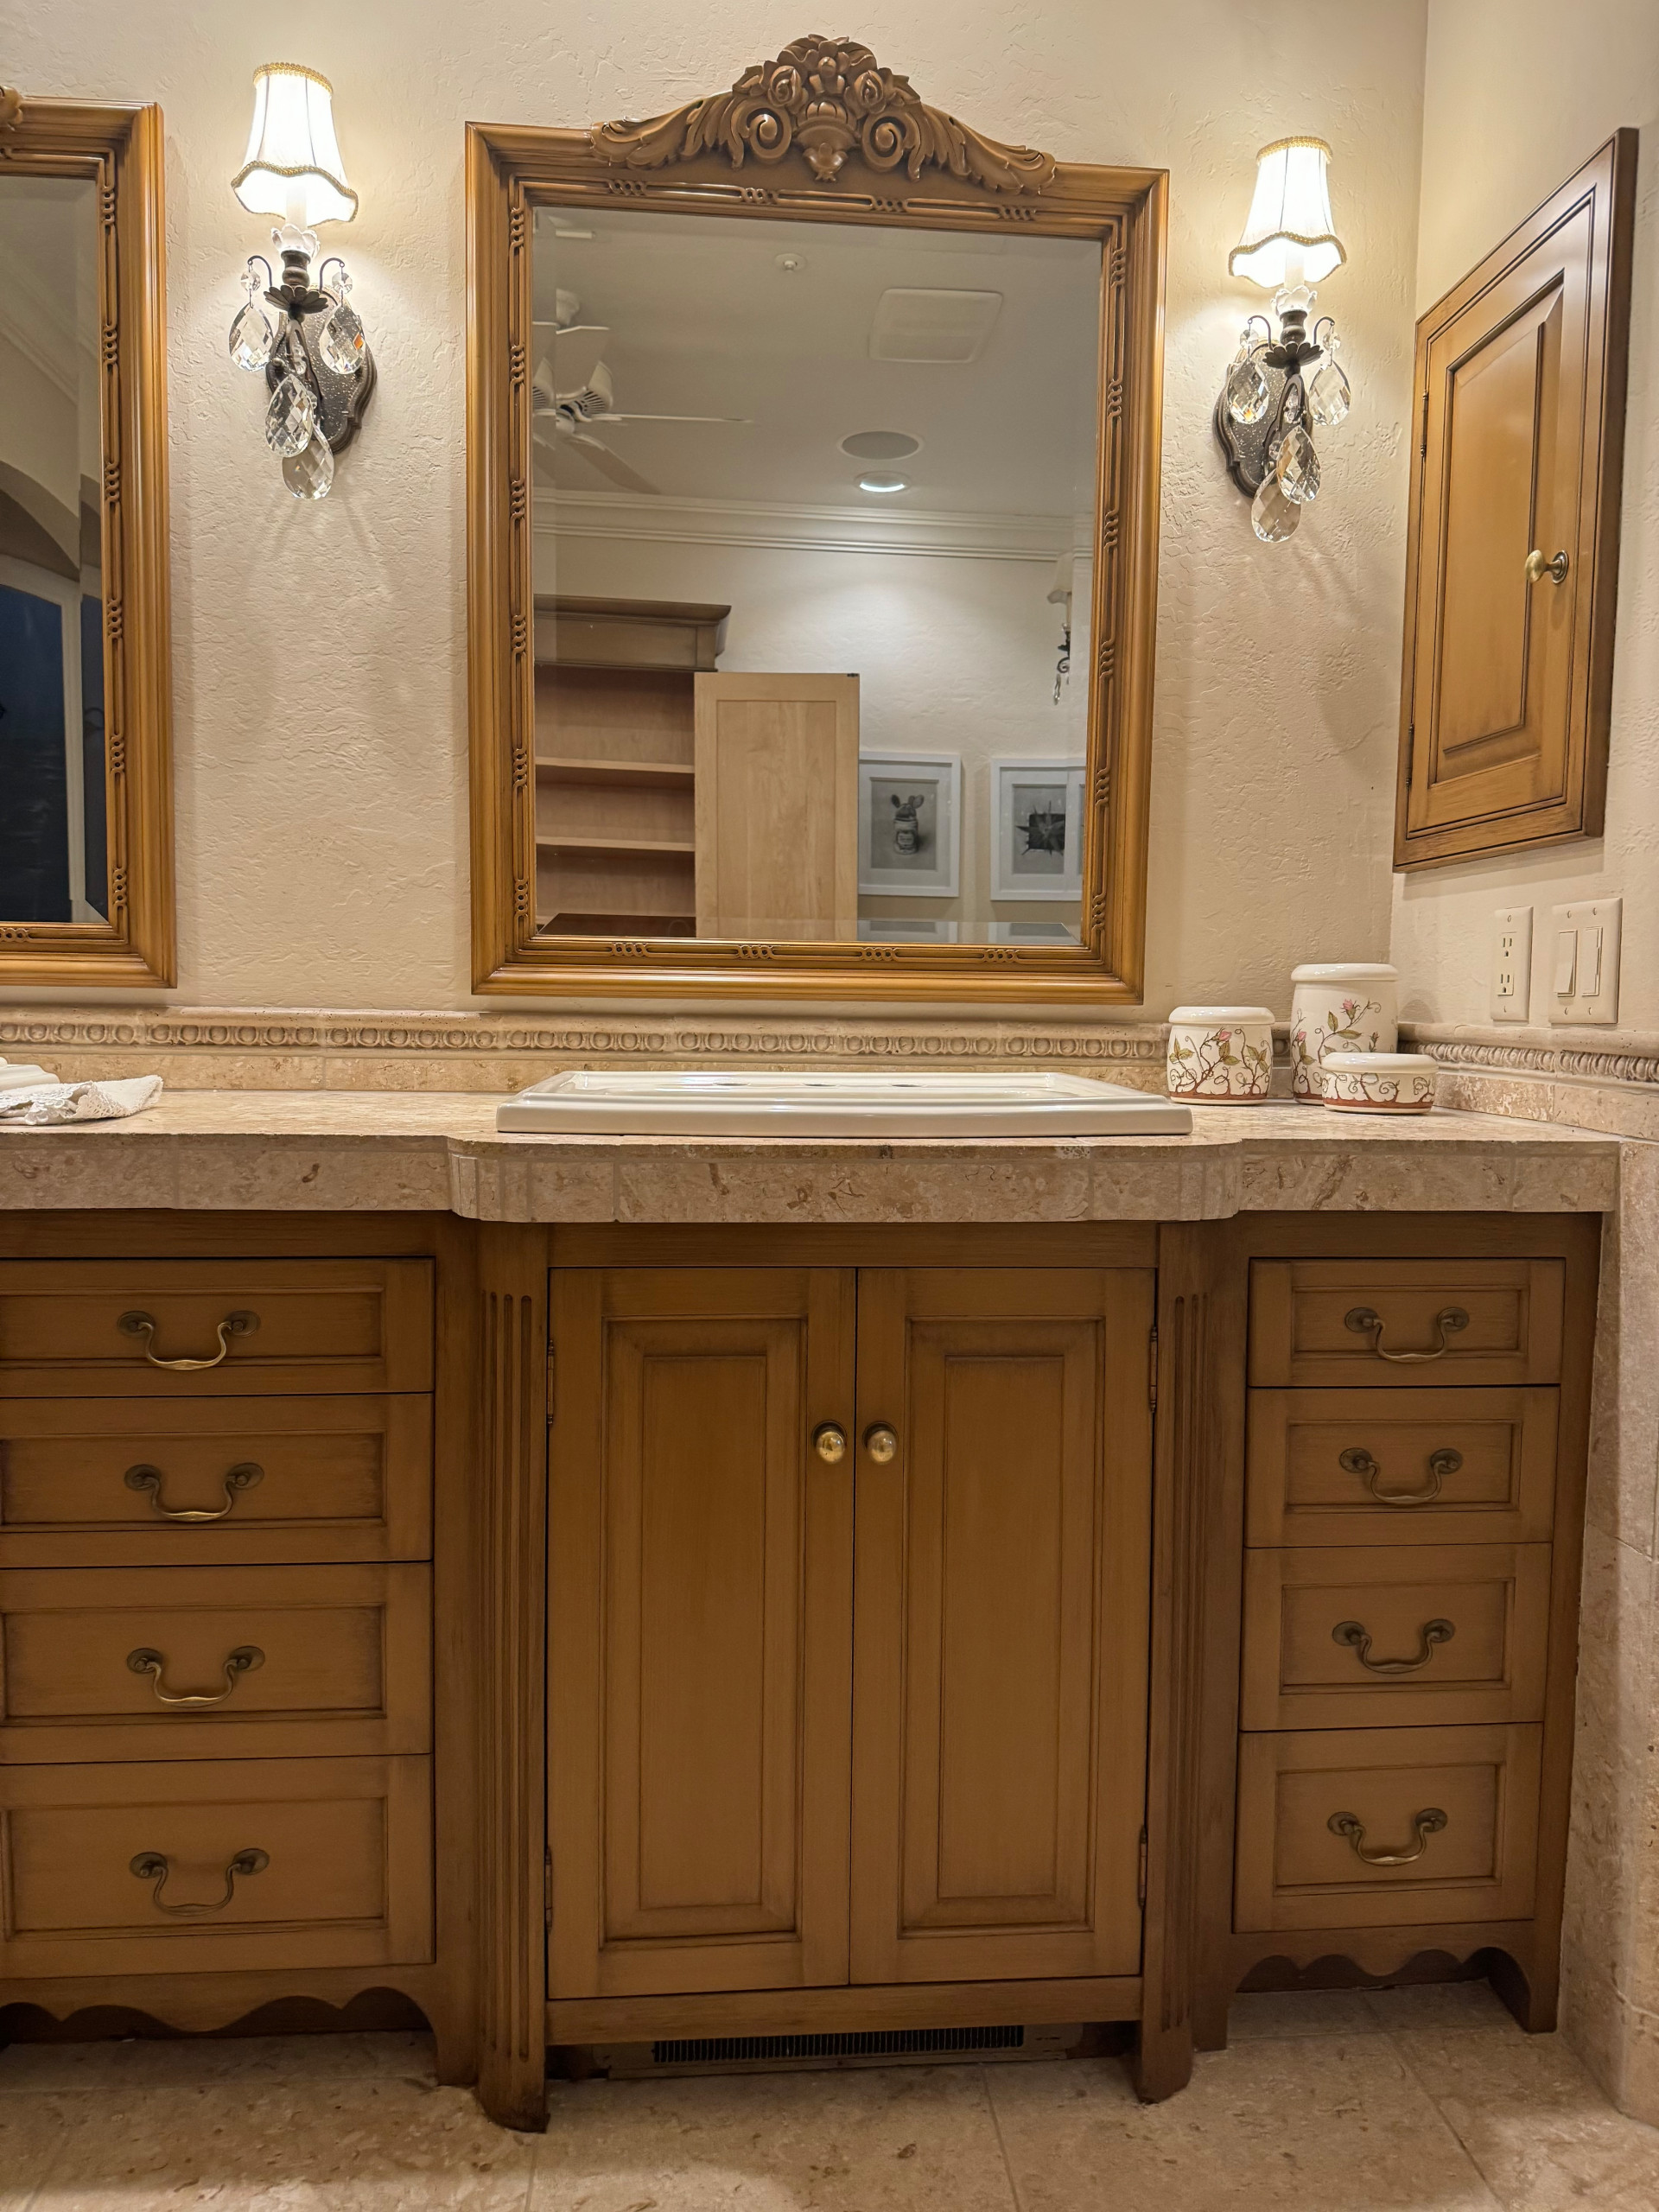 Refinished Bathroom Cabinets with Custom Faux Finish